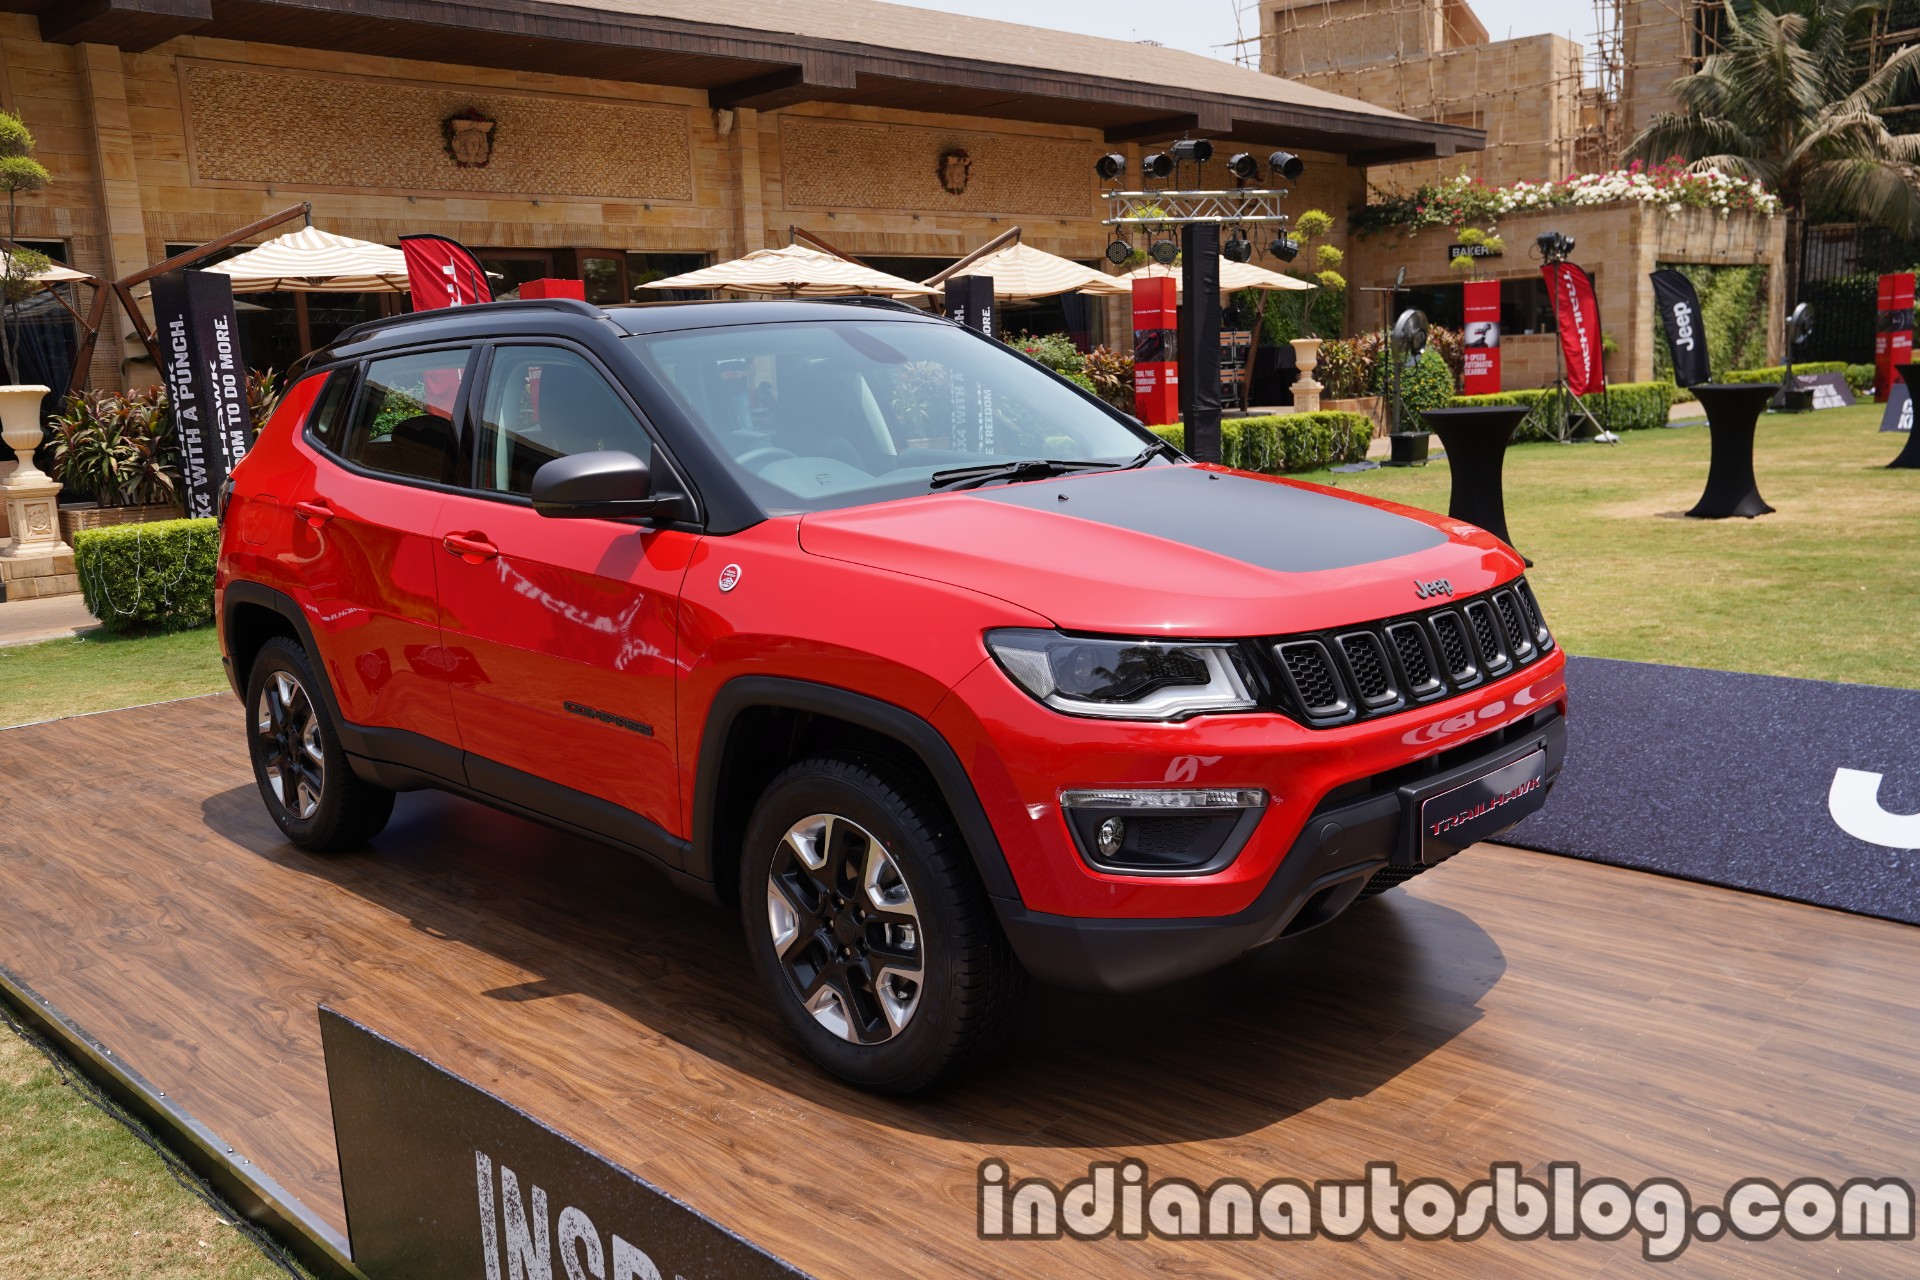 7-Seater Jeep Compass Digitally Imagined - IAB Rendering